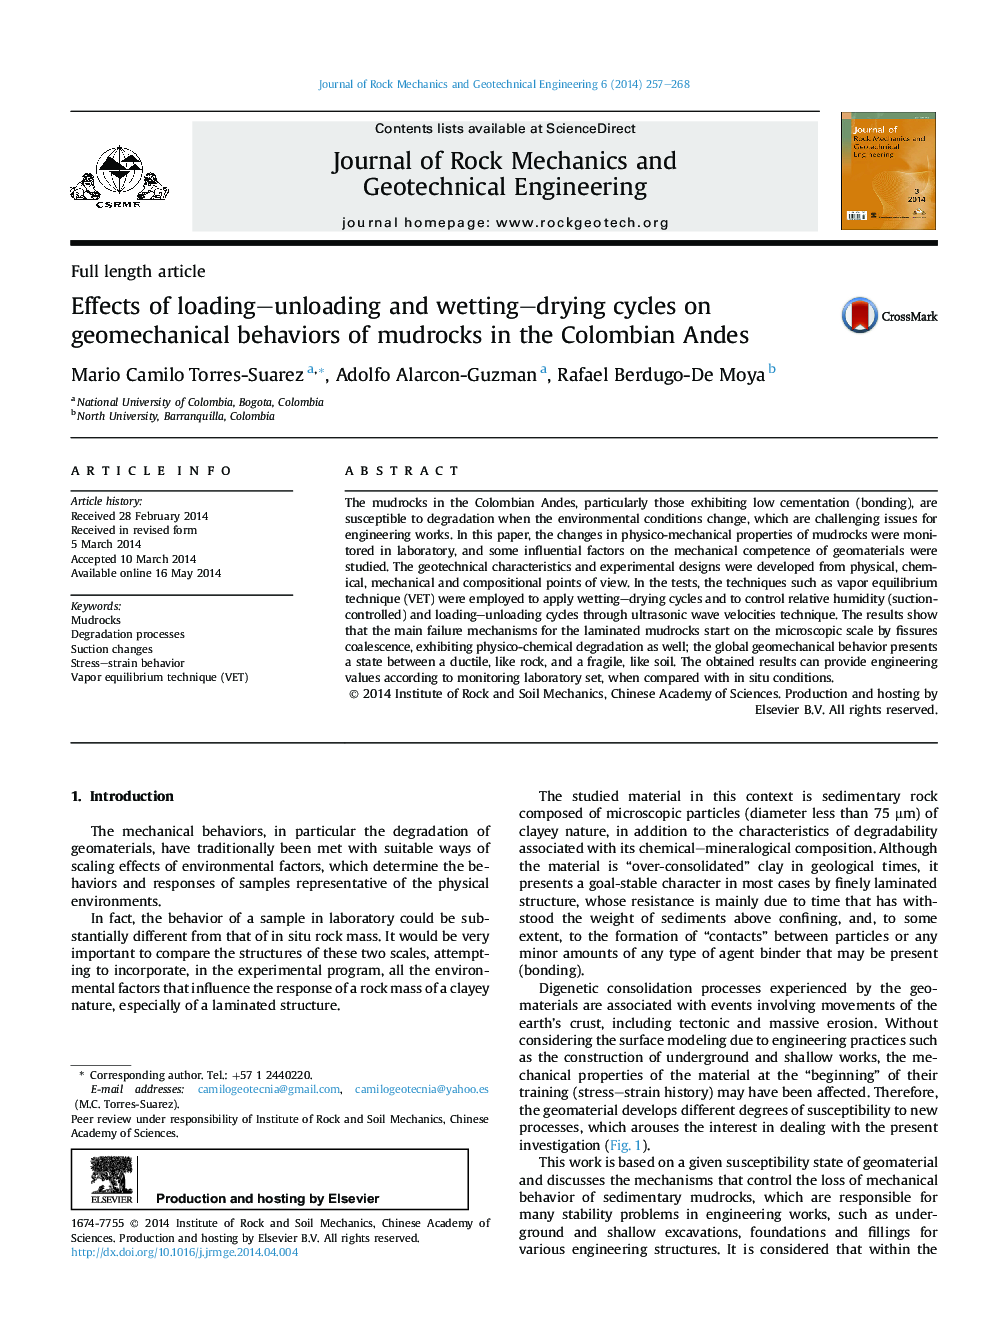 Effects of loading–unloading and wetting–drying cycles on geomechanical behaviors of mudrocks in the Colombian Andes 